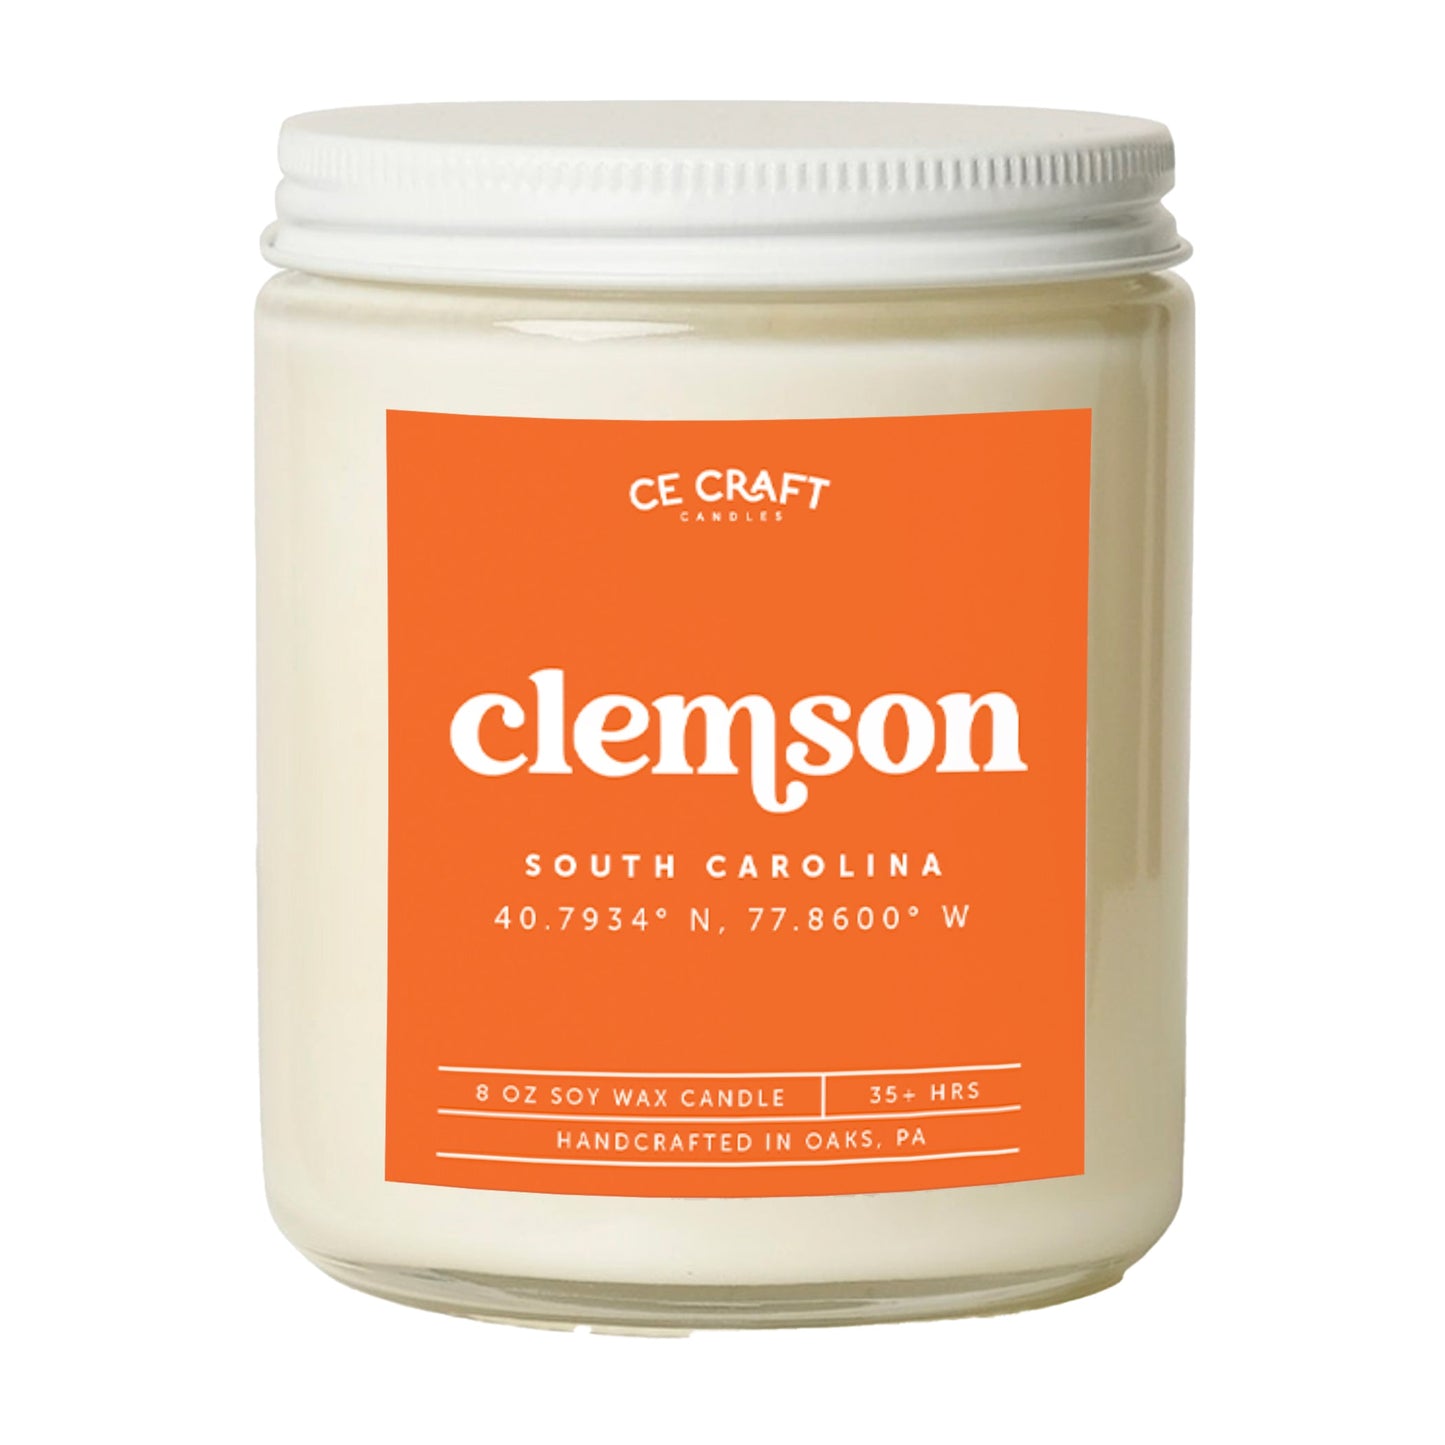 Clemson Scented Candle Candles CE Craft 